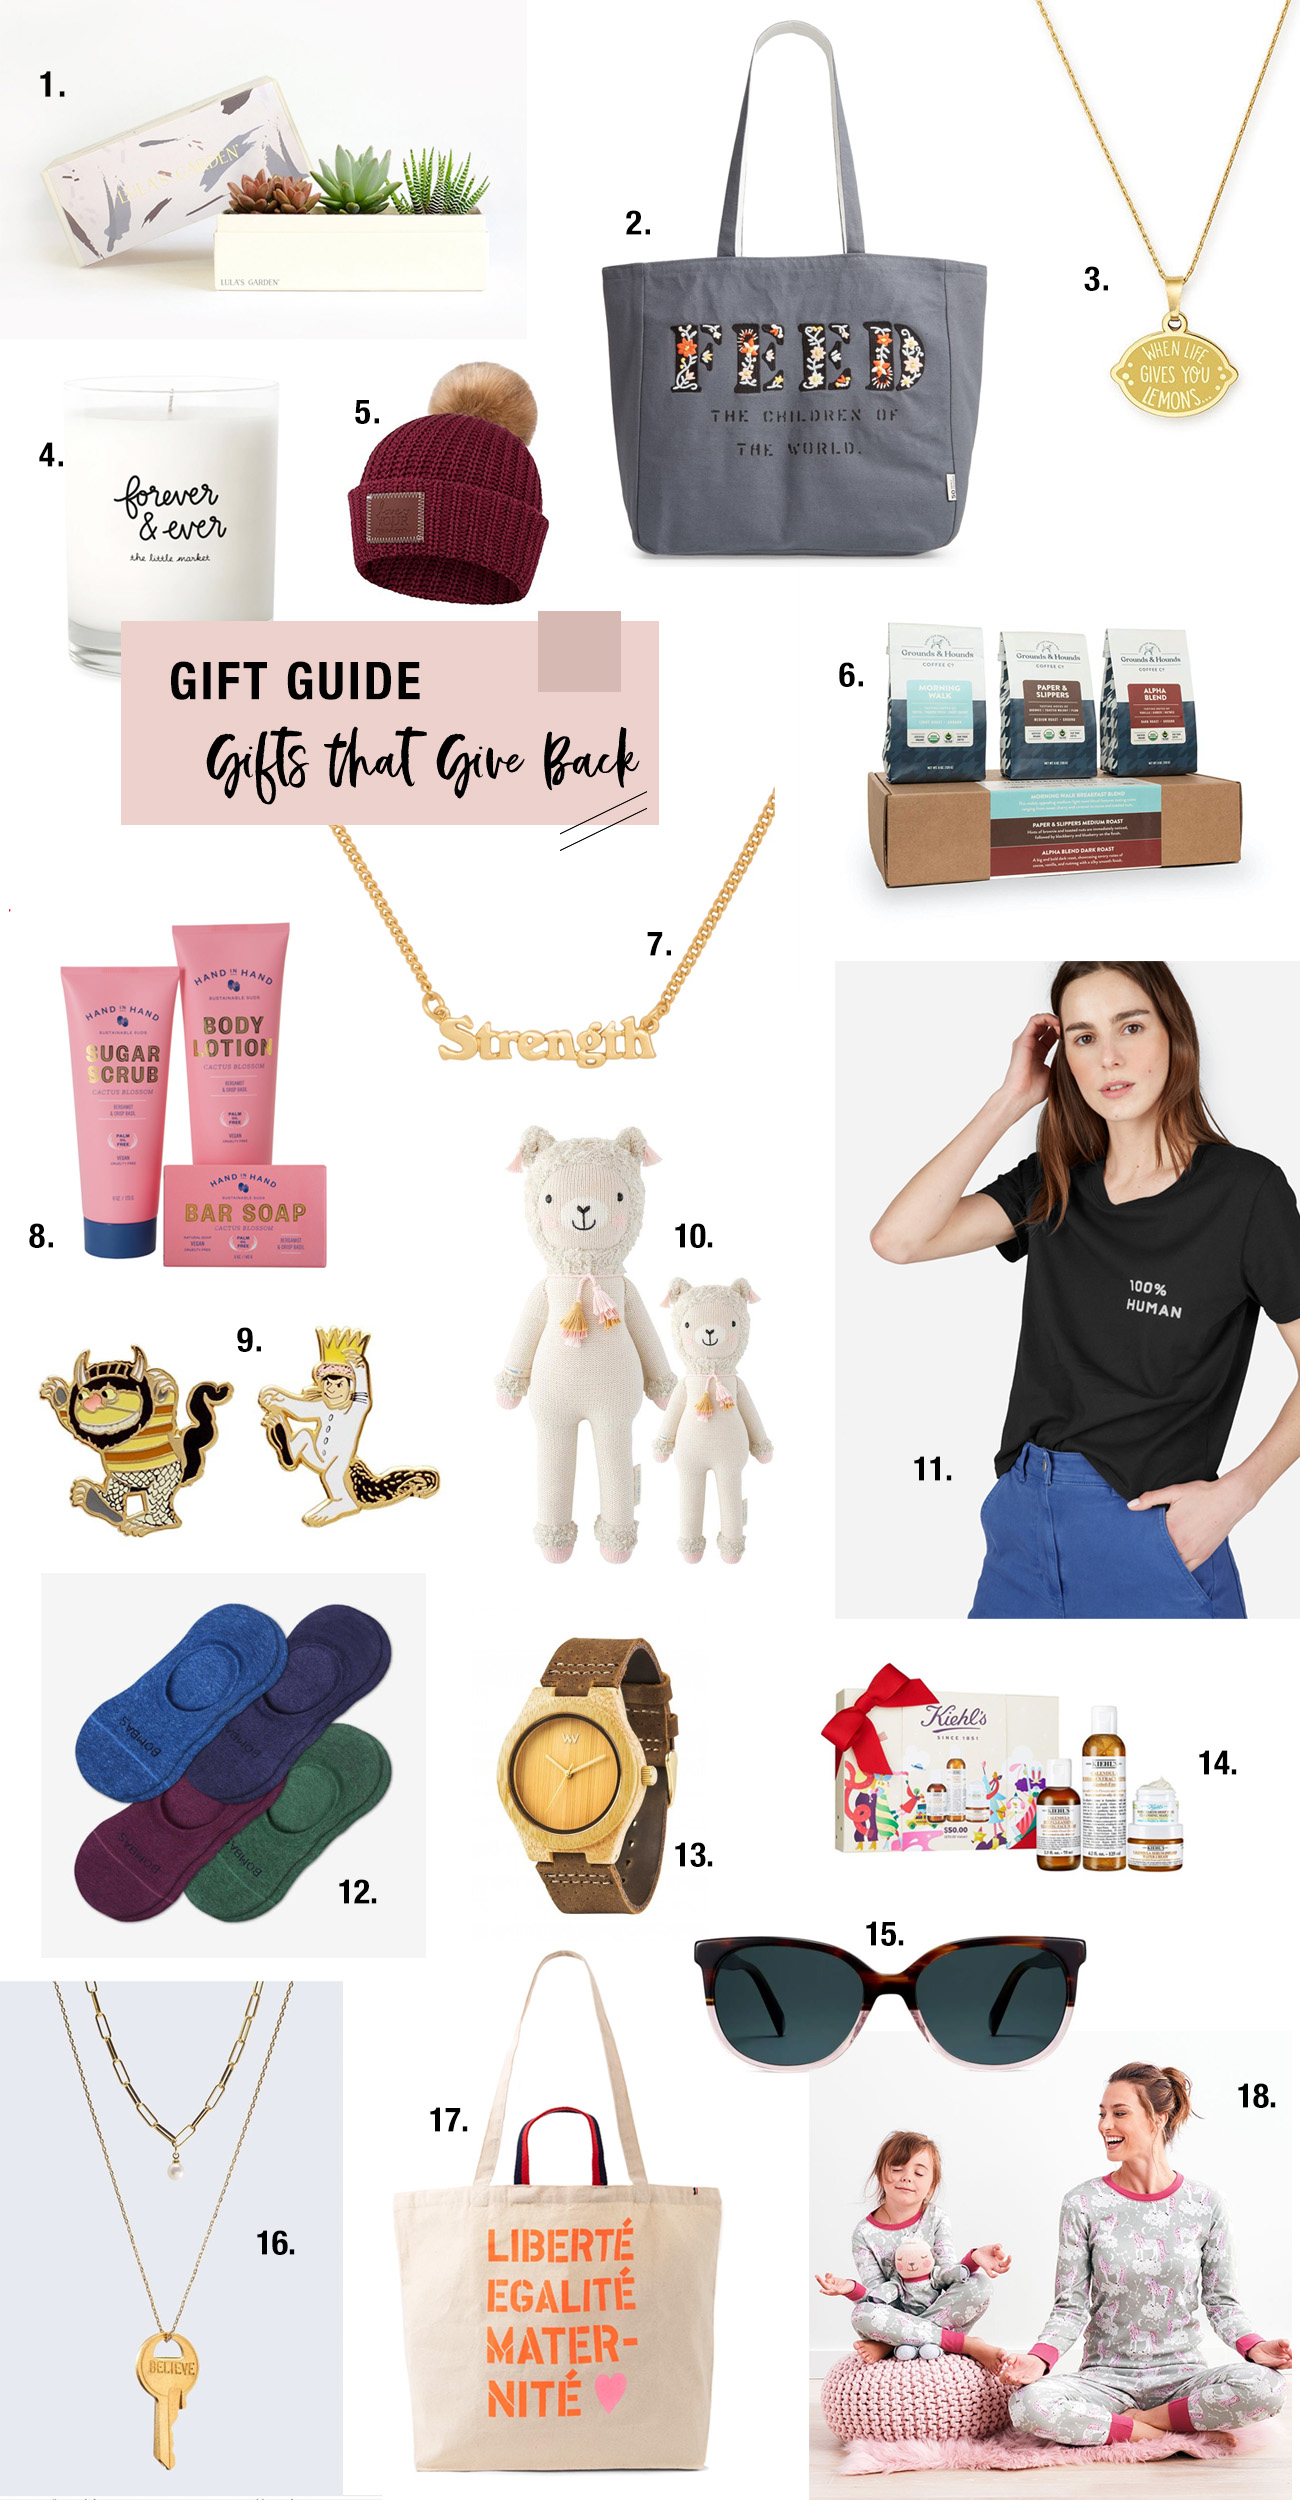 2019 Gift Guide for Gifts that Give Back 